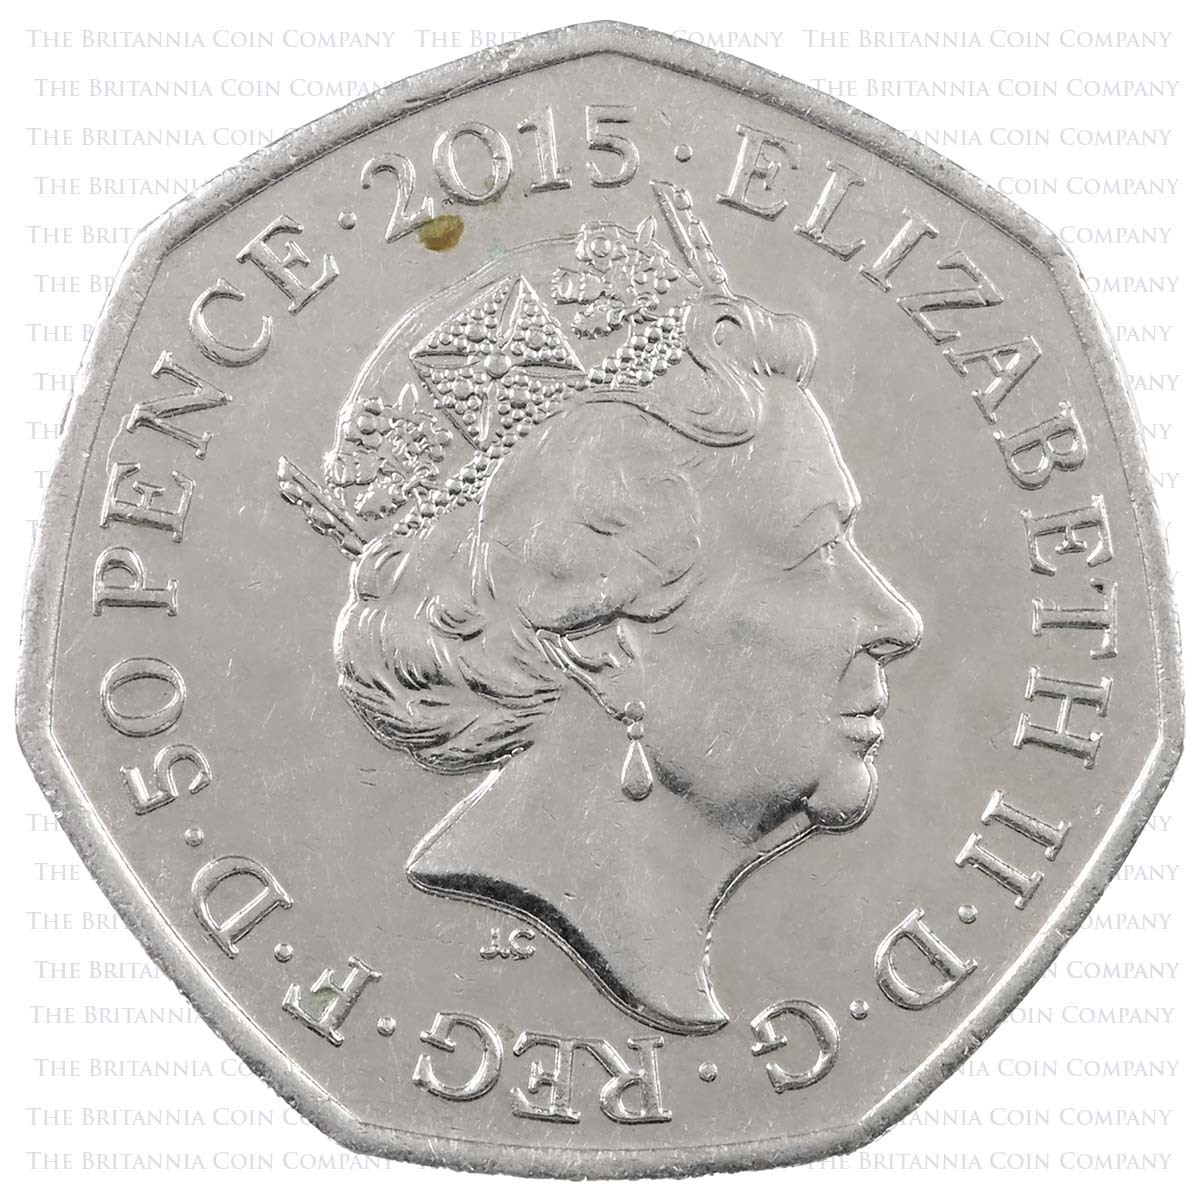 2015 Battle Of Britain Anniversary Circulated Fifty Pence Coin Obverse